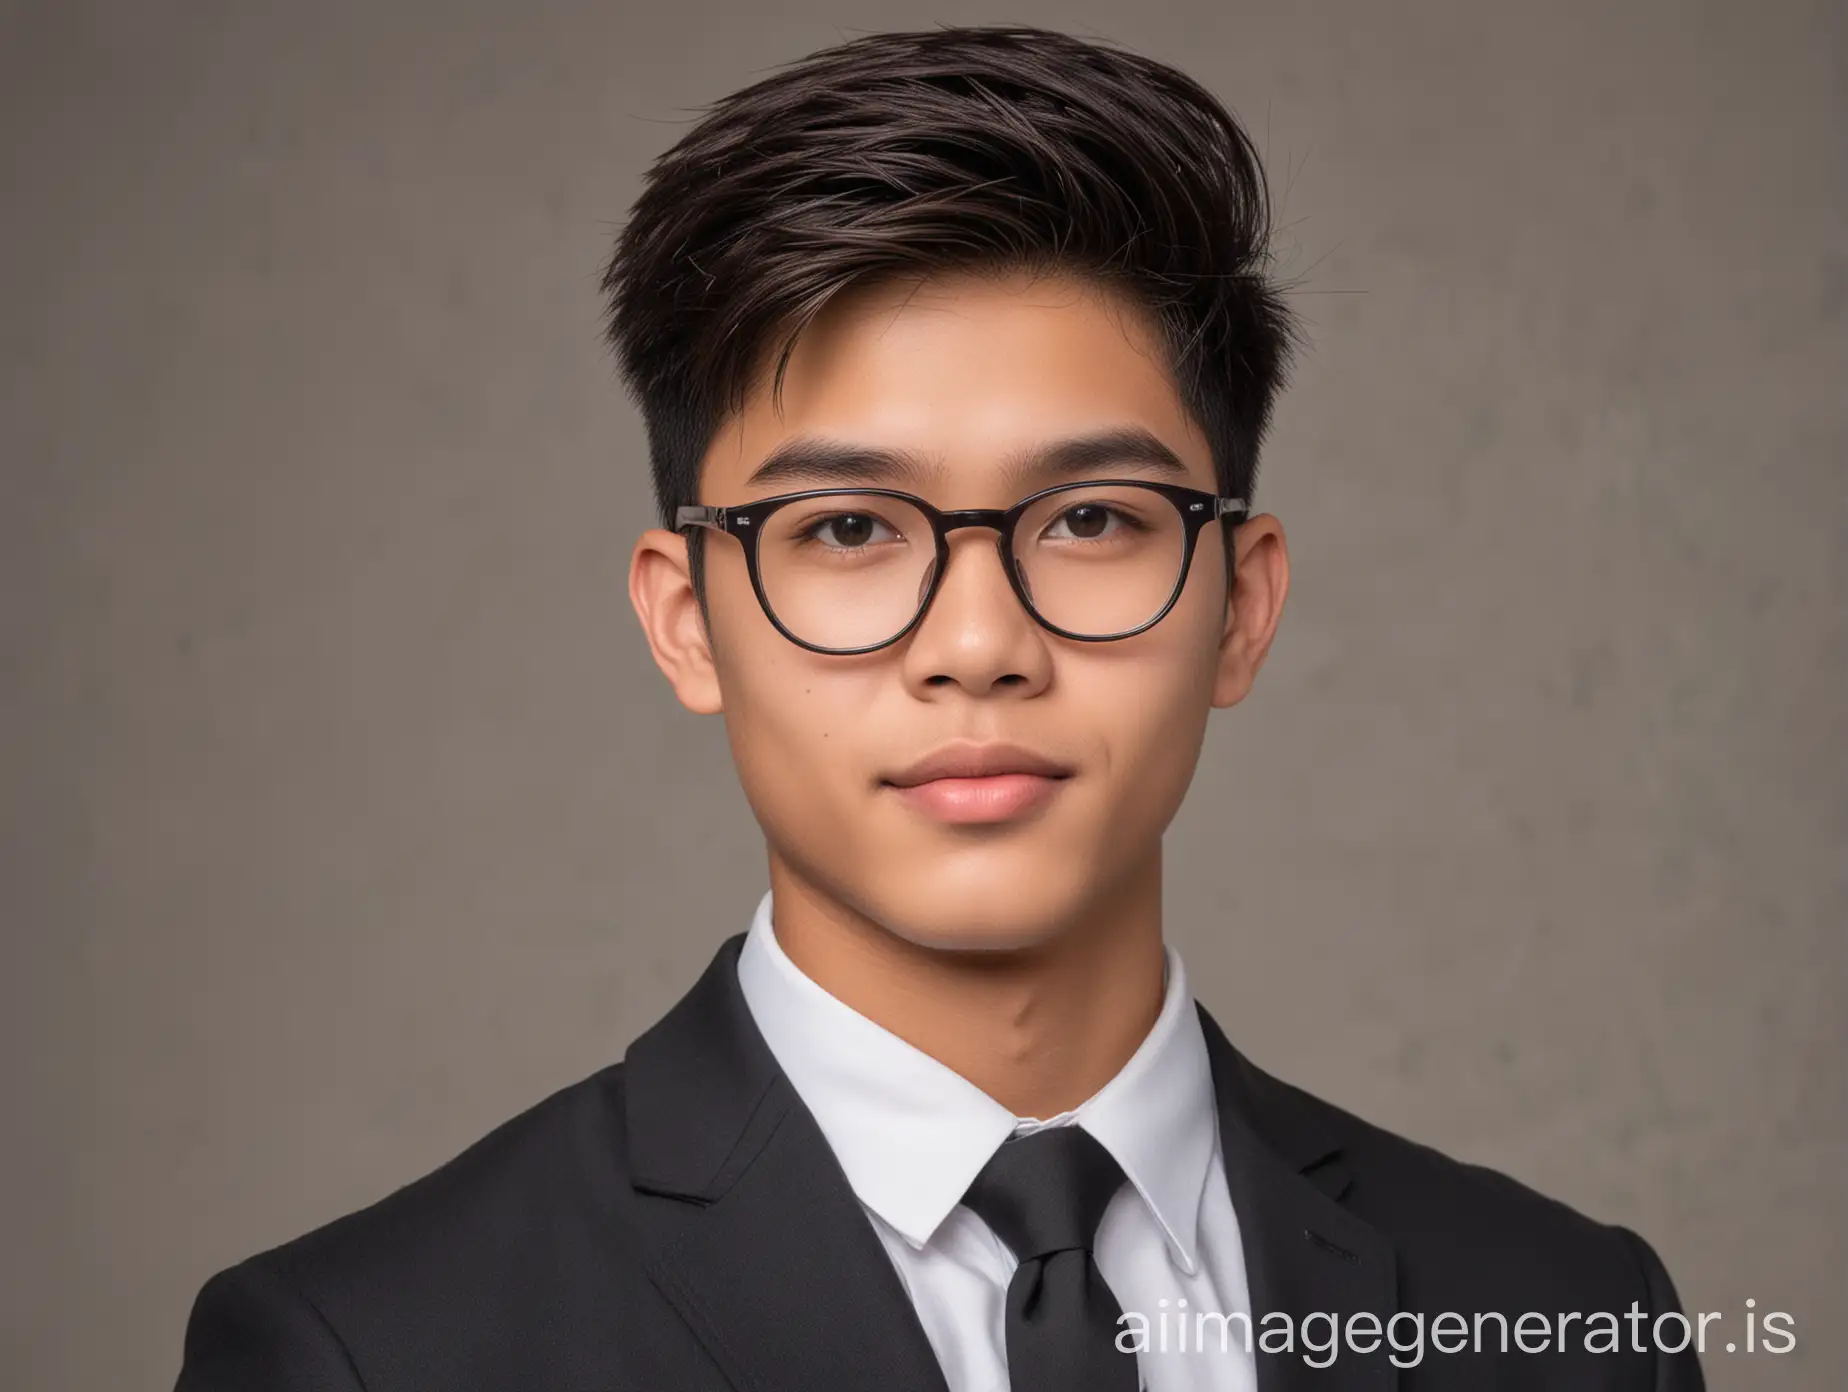 18 year old filipino teen male fair skin slightly lighter tone posing for a LinkedIn photo in formal wear solid and light forming in background wearing thin framed glasses with mid part fade haircut